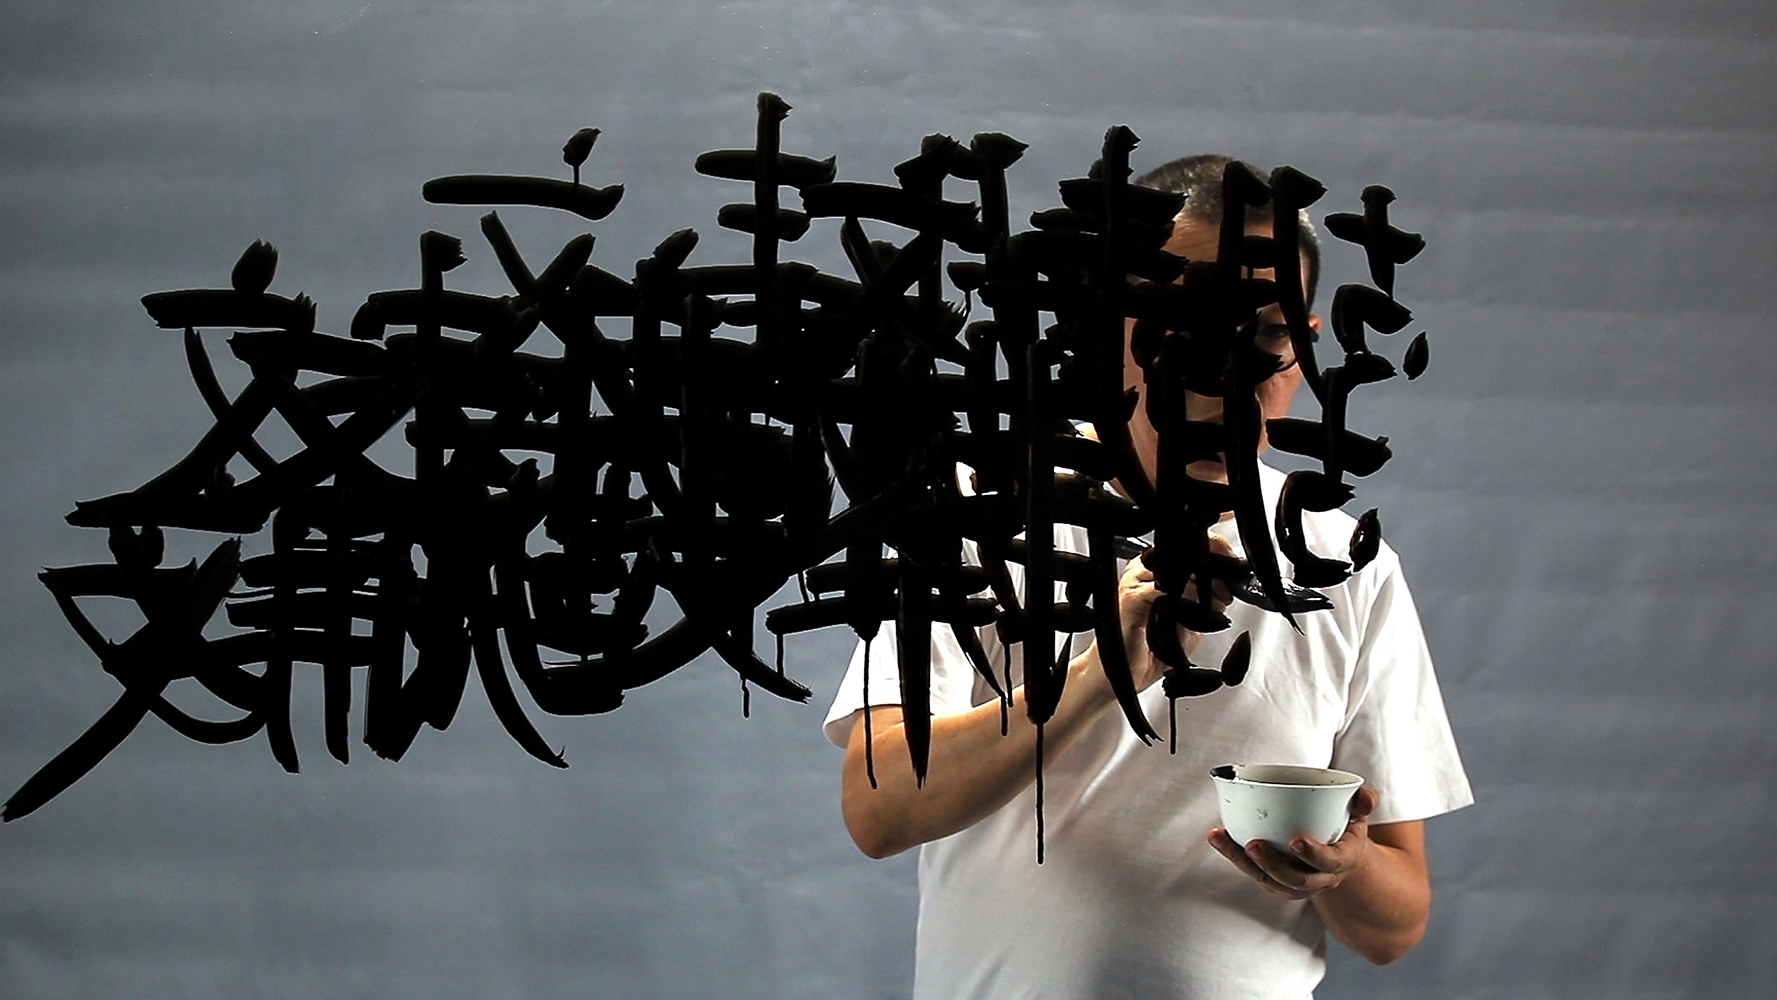 FX Harsono, ??????? ?? ??? ????, video still, 2011, courtesy the artist and Museum of Contemporary Photography